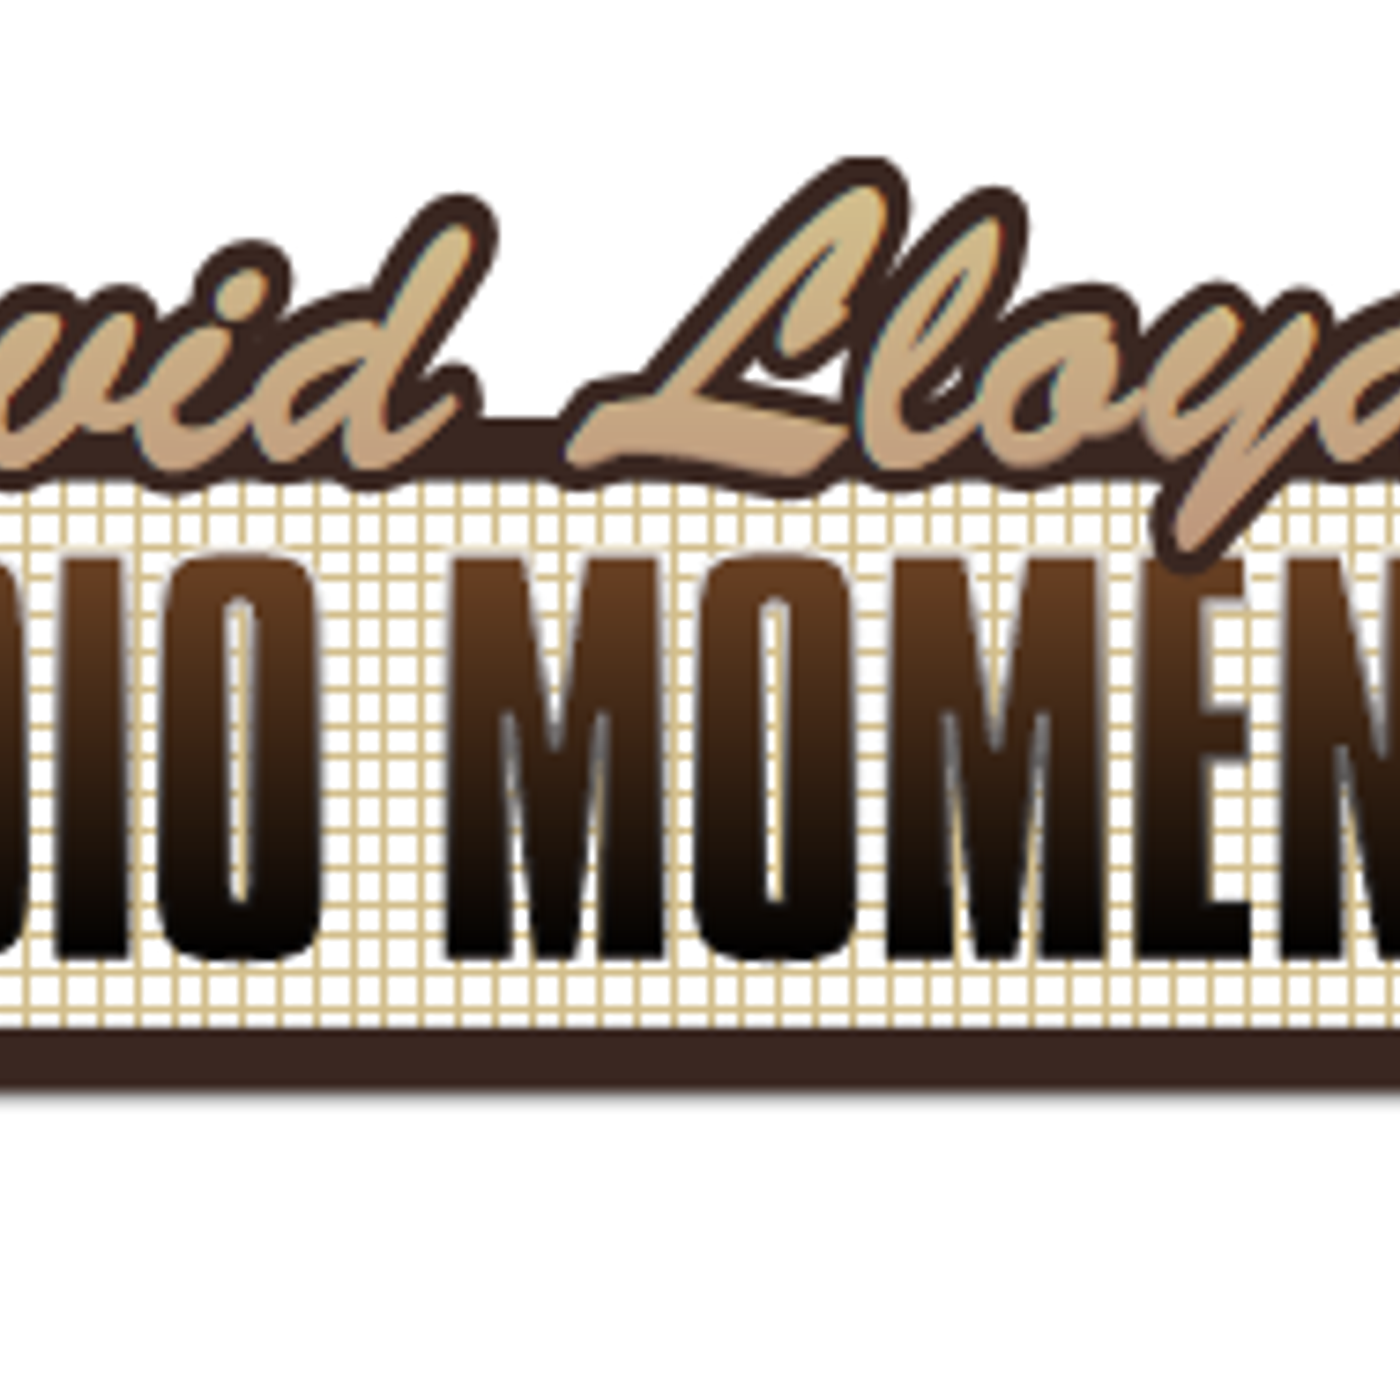 1269: Radiomoments review 9th December 2016